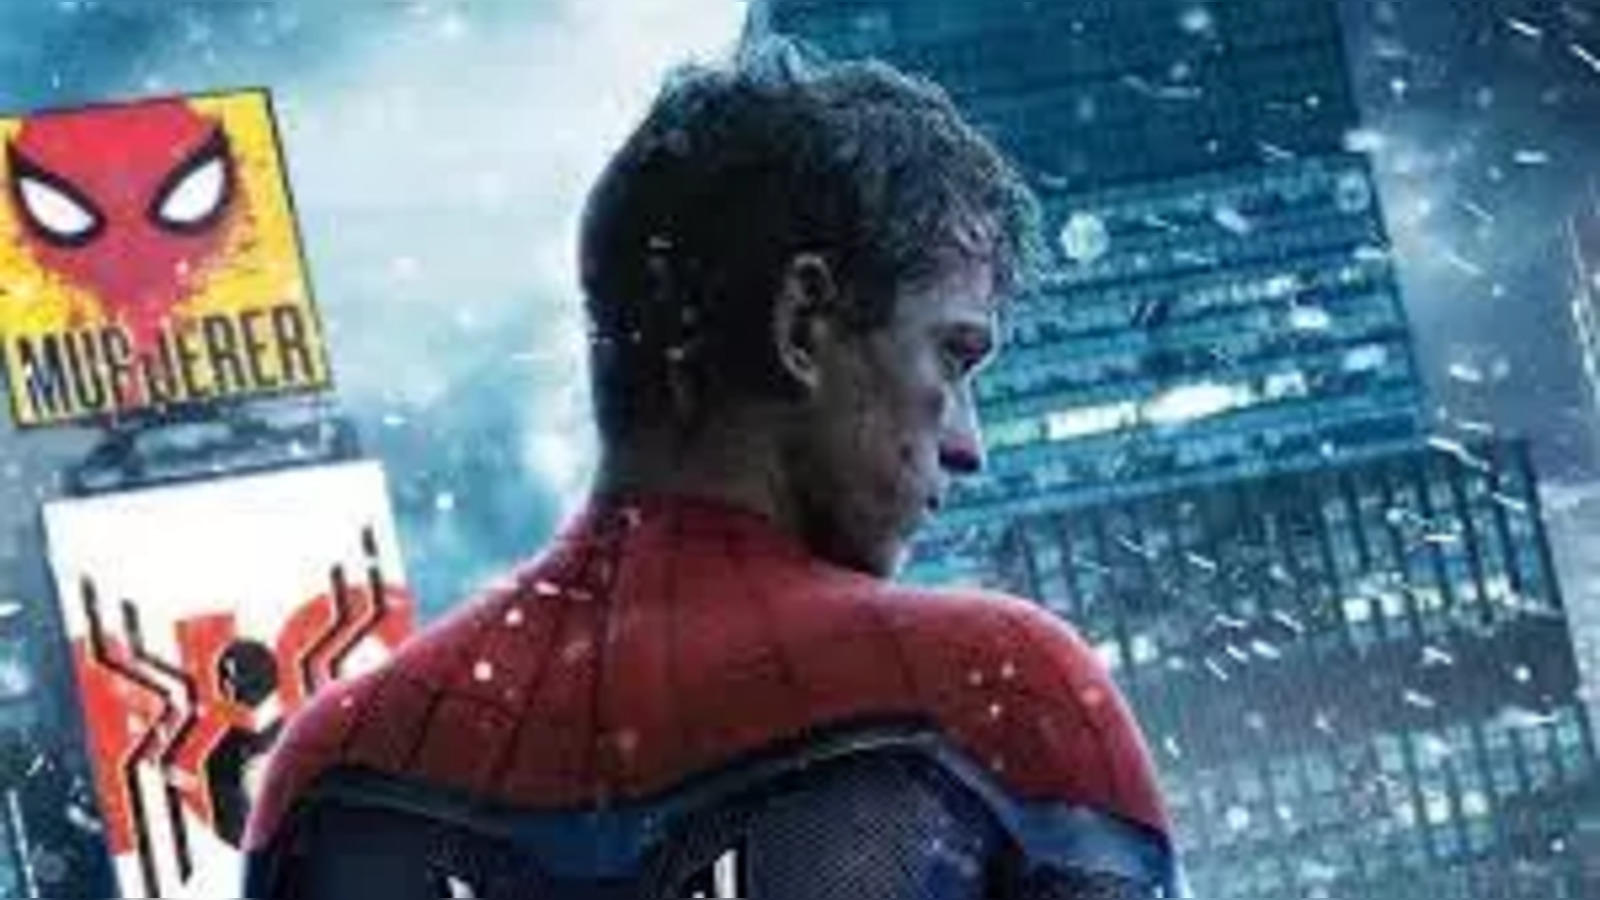 New Tom Holland Spider-Man movie officially in the works at Marvel - Polygon